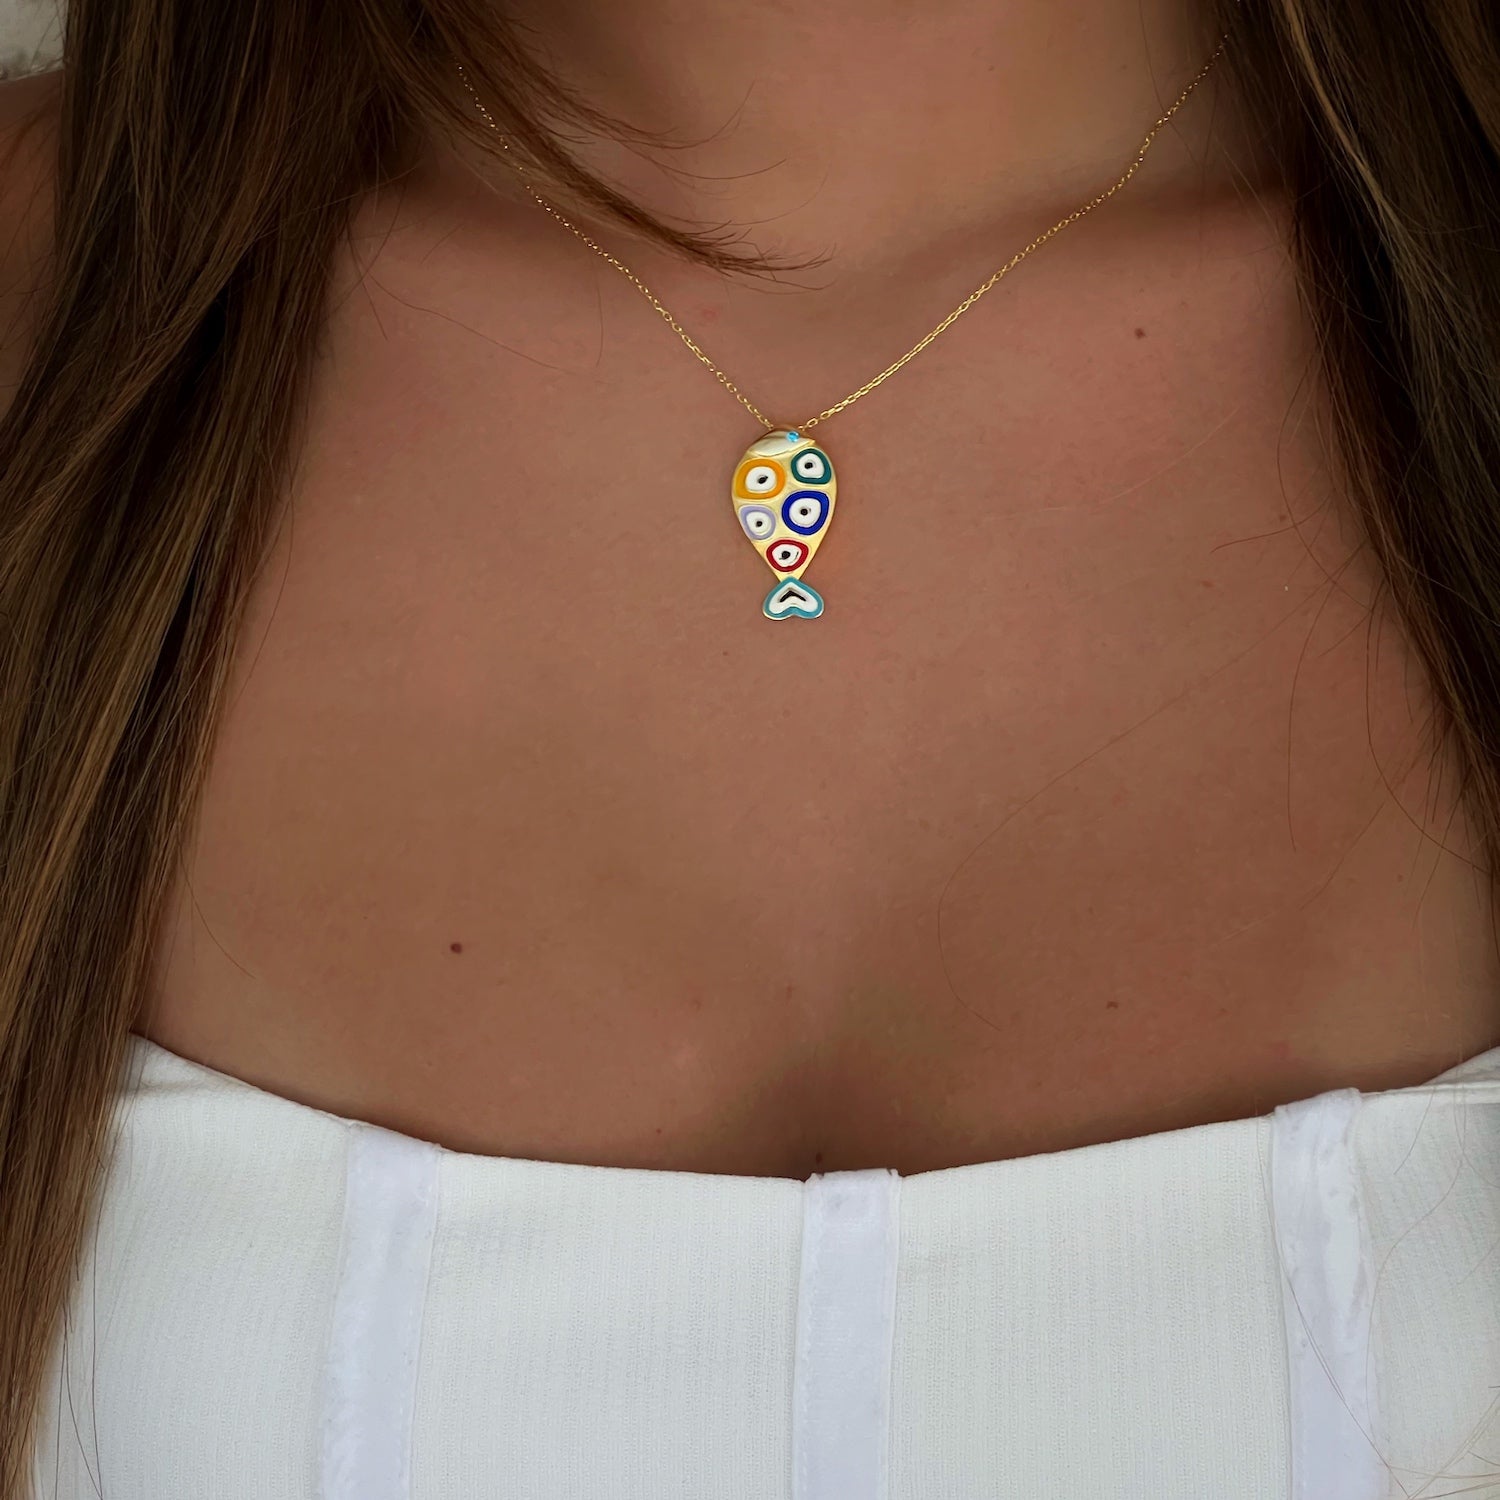 The Silver Evil Eye Fish Necklace elegantly adorning the neck of a model, adding a touch of charm and protection to their outfit.